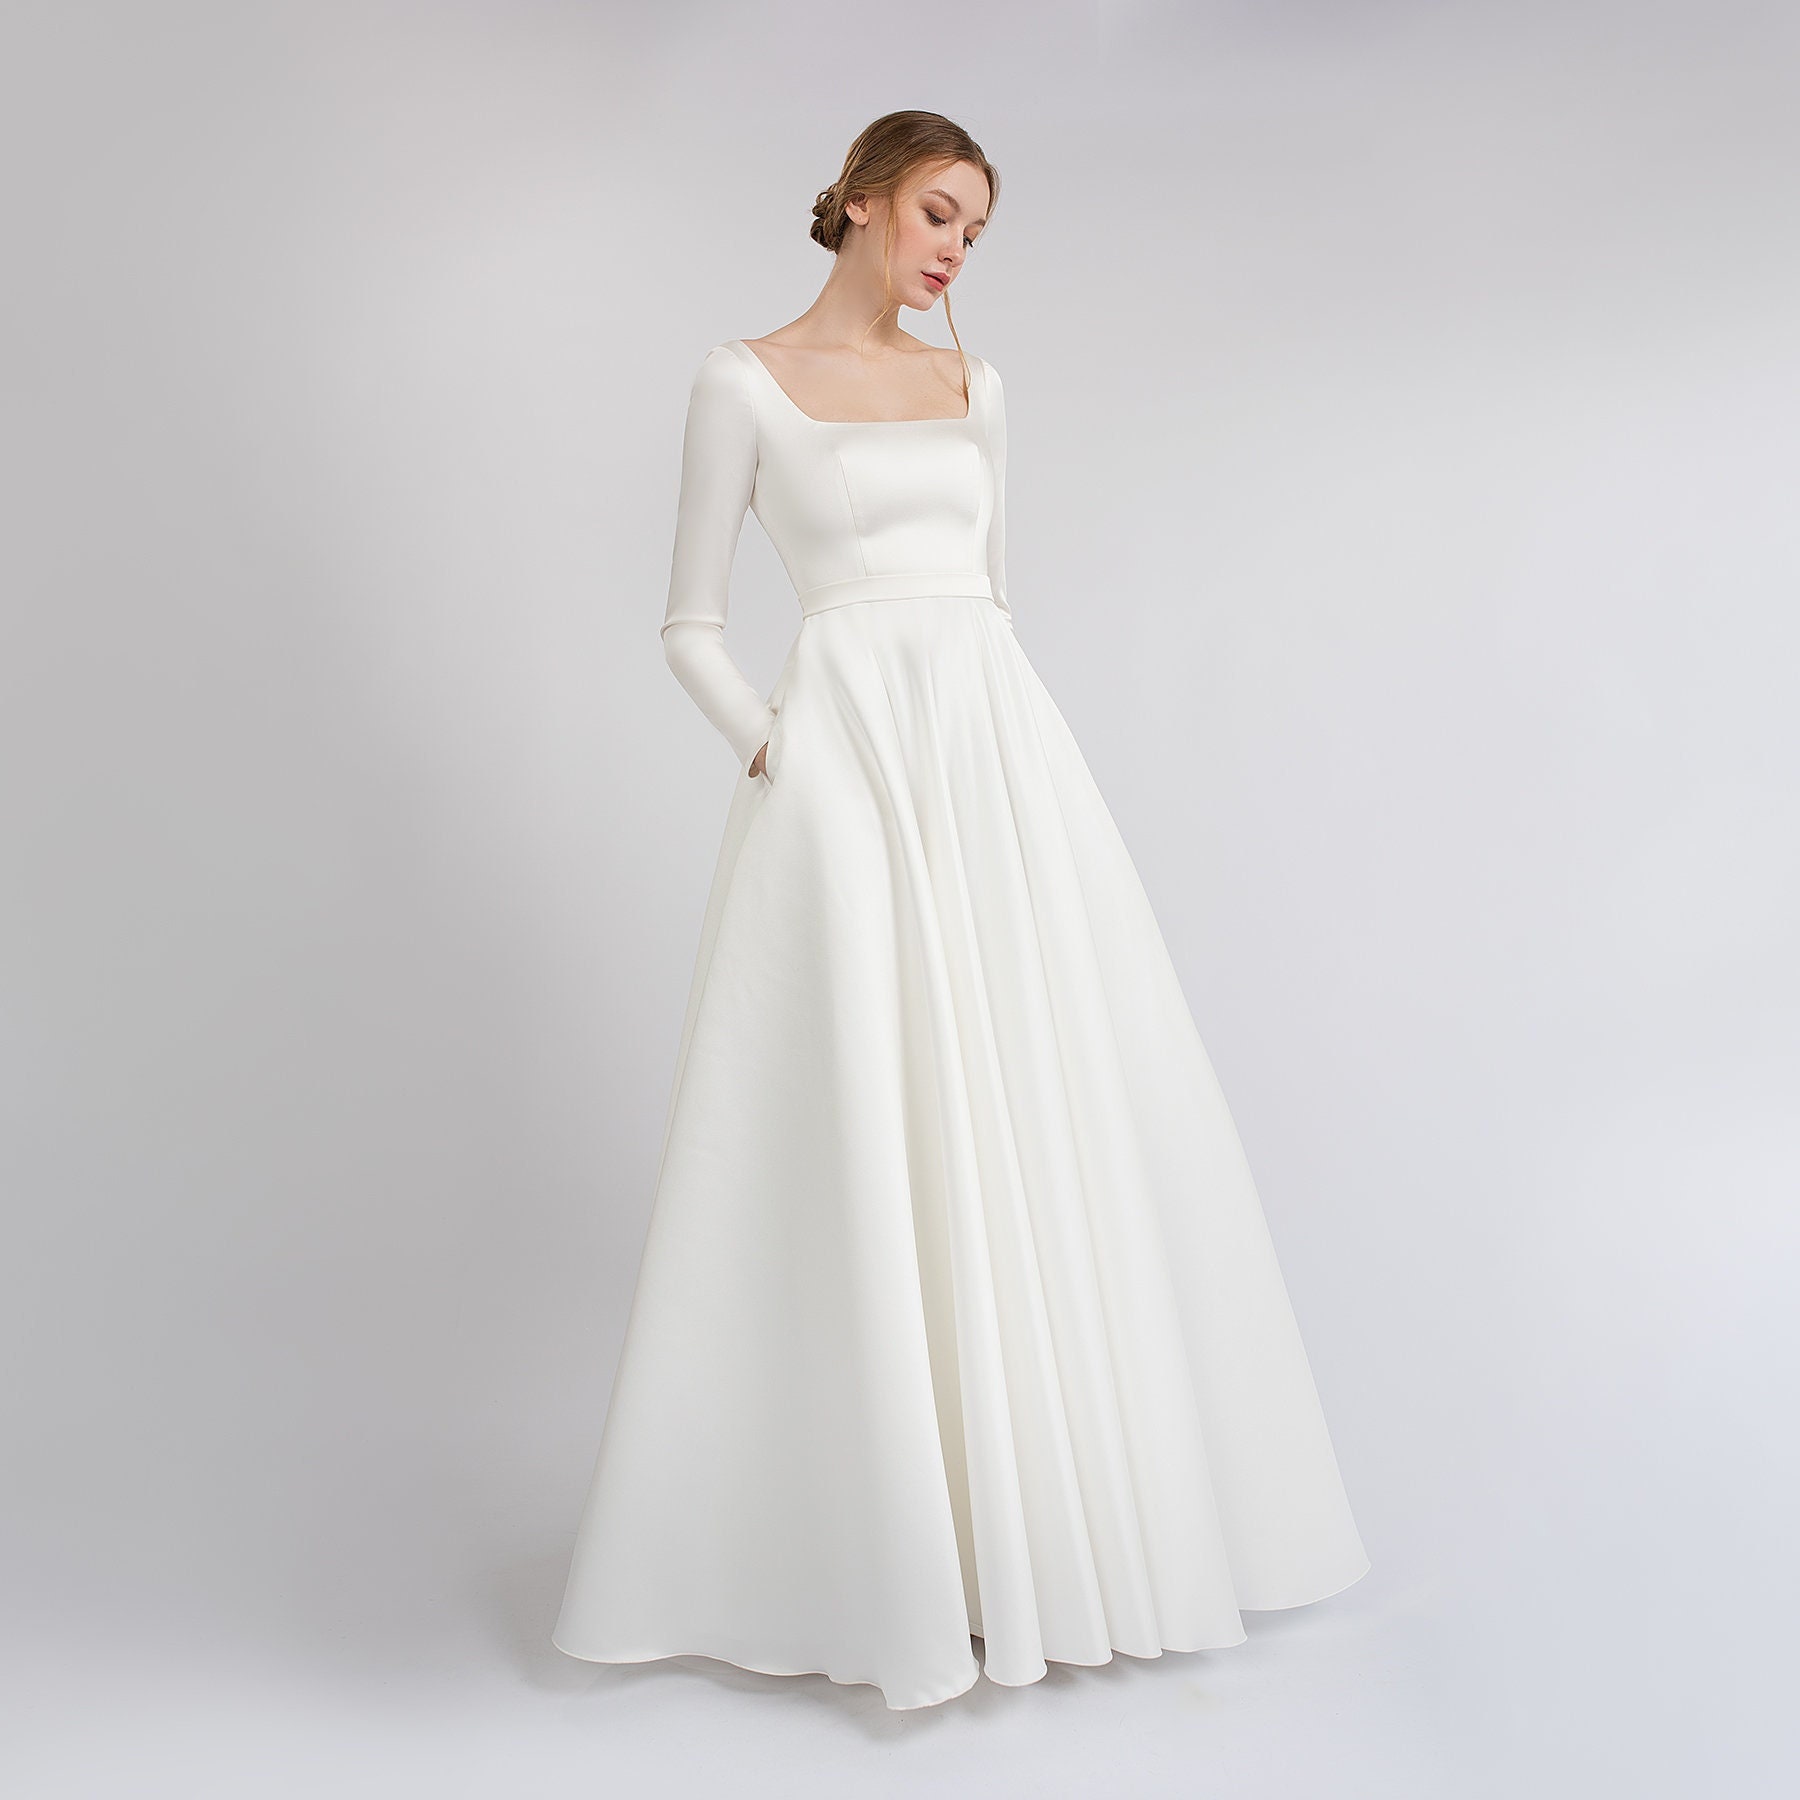 Illusion Square Neck White Long Sleeves Princess Ball Gown Wedding